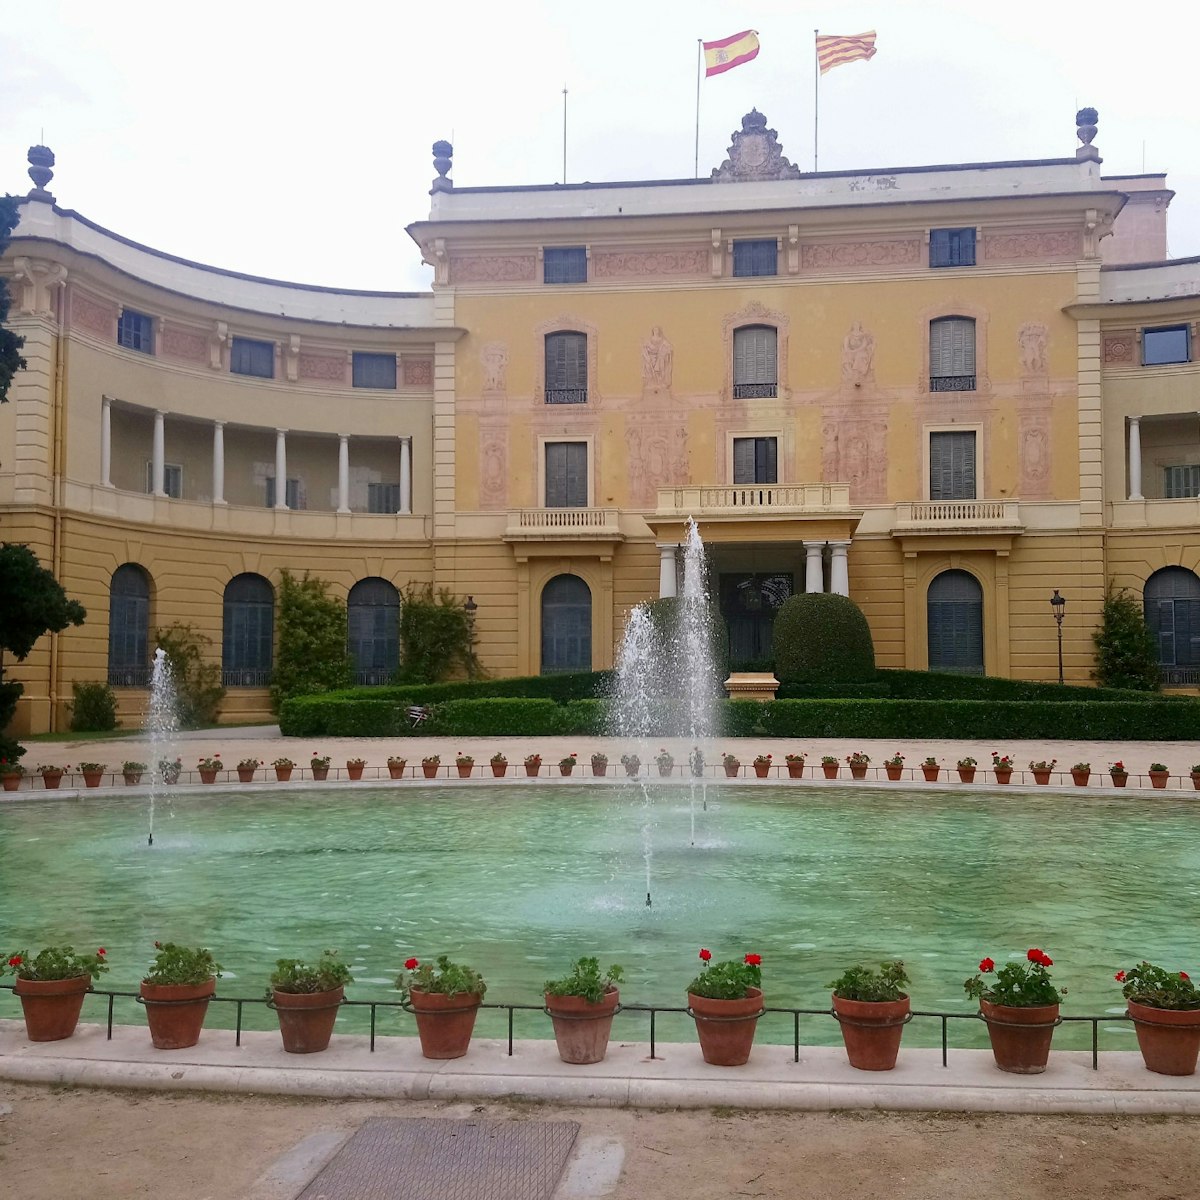 The Palau Pedralbes inside the gardens